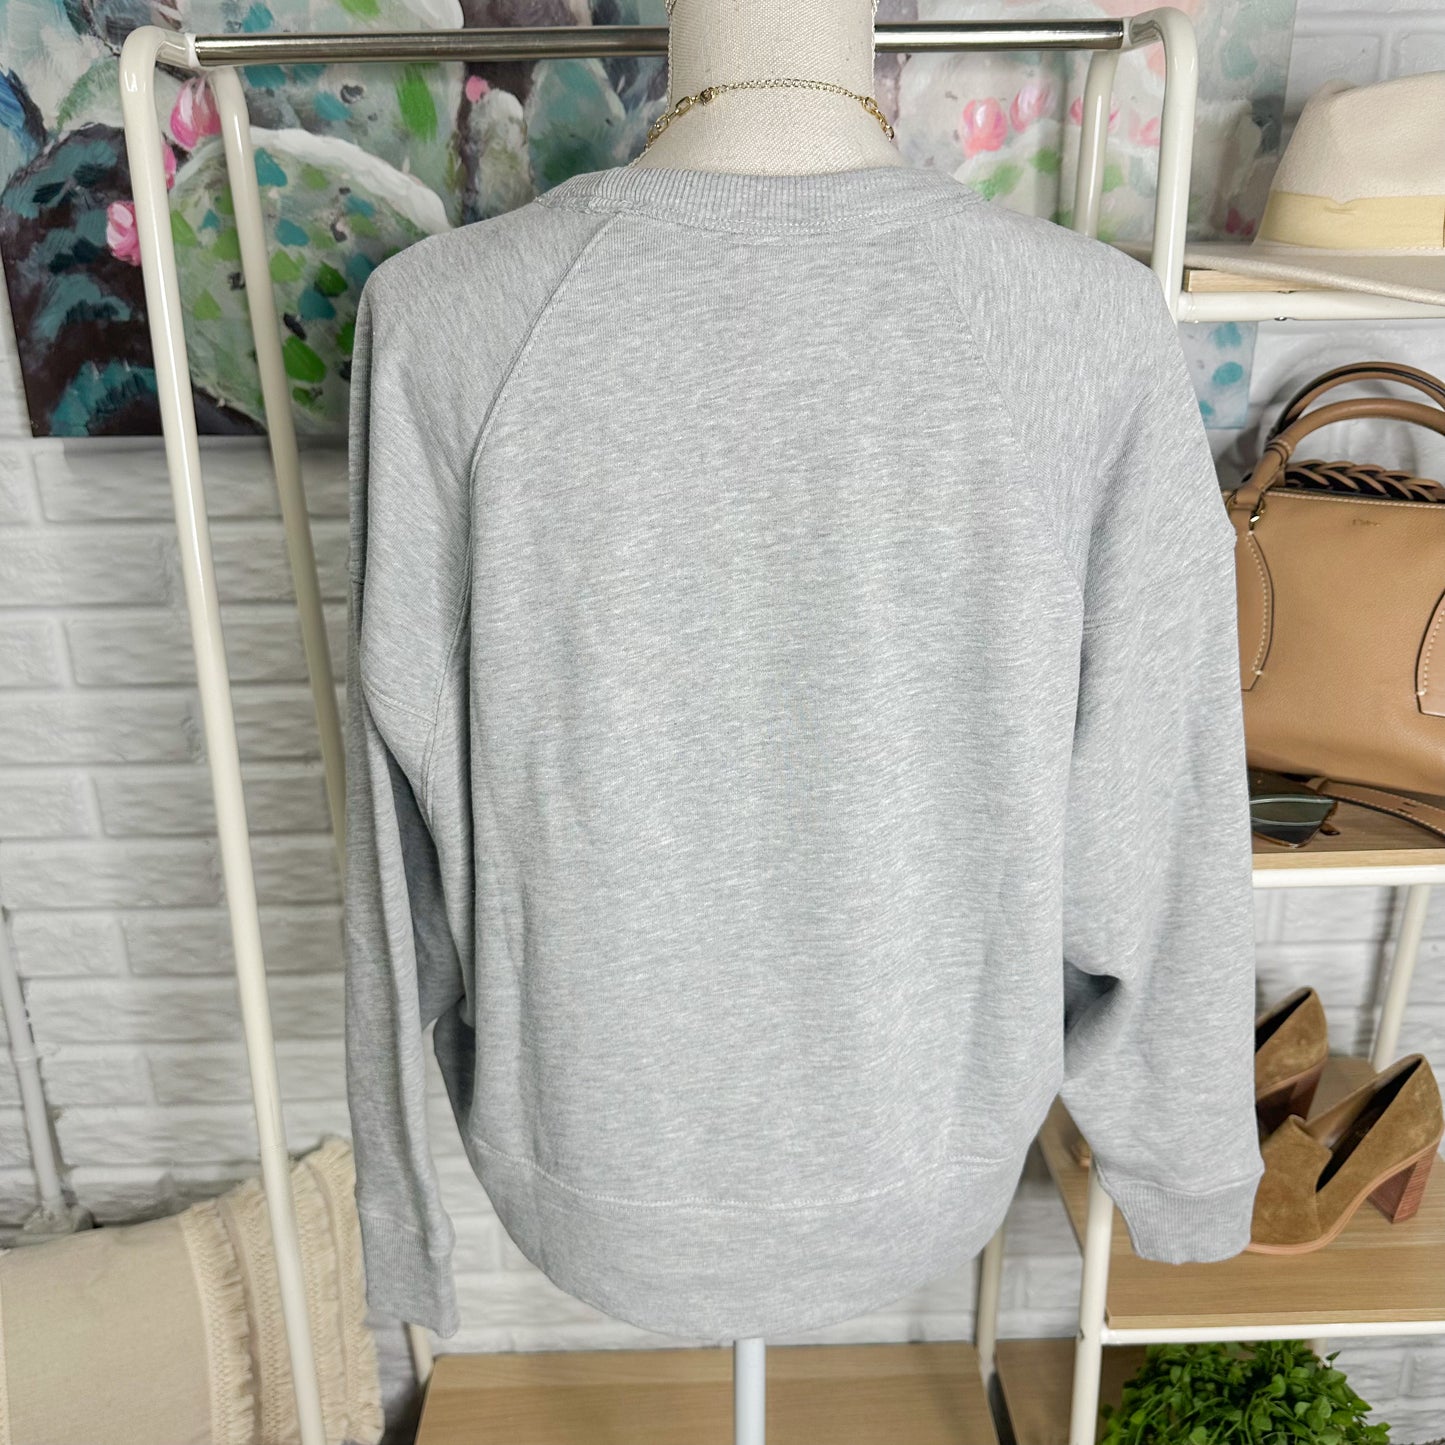 Lou & Grey Cabin Fever Fluffy Fleece Graphic Sweater Size XS